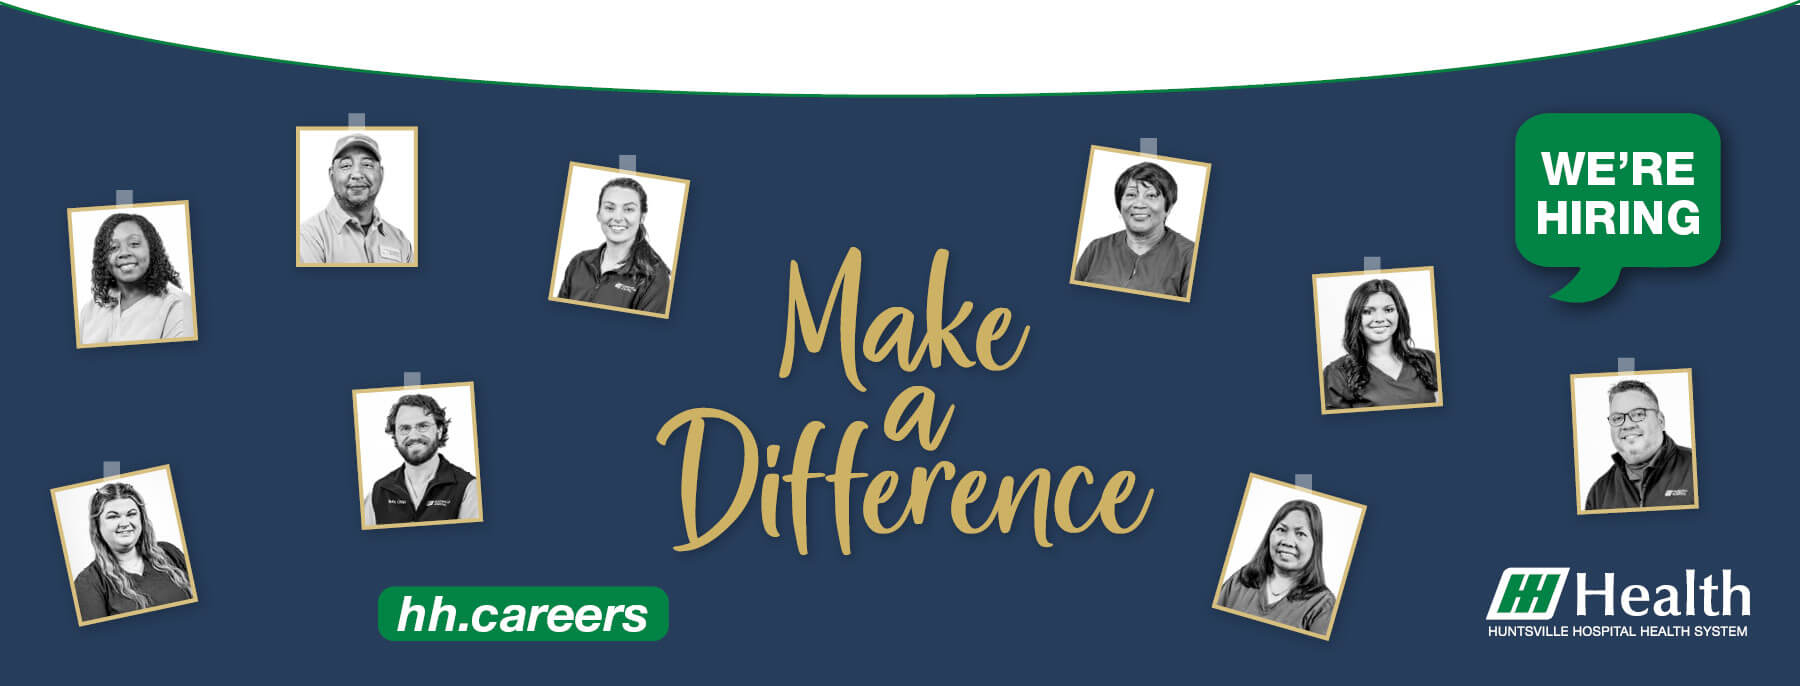 Make a difference. We're hiring! Visit hh.careers.